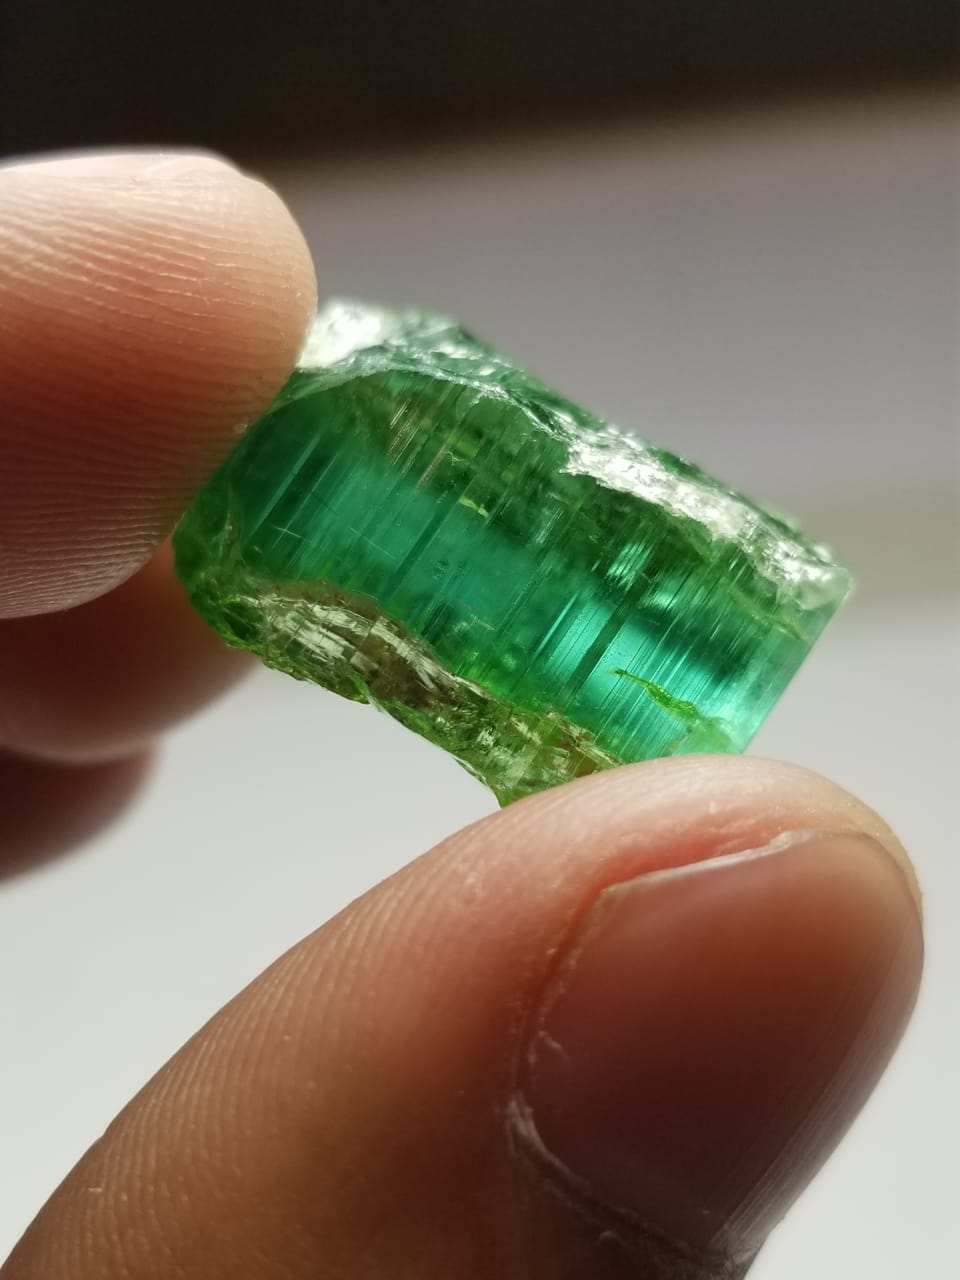 Sweet chunk of Facet Rough Tourmaline for sale